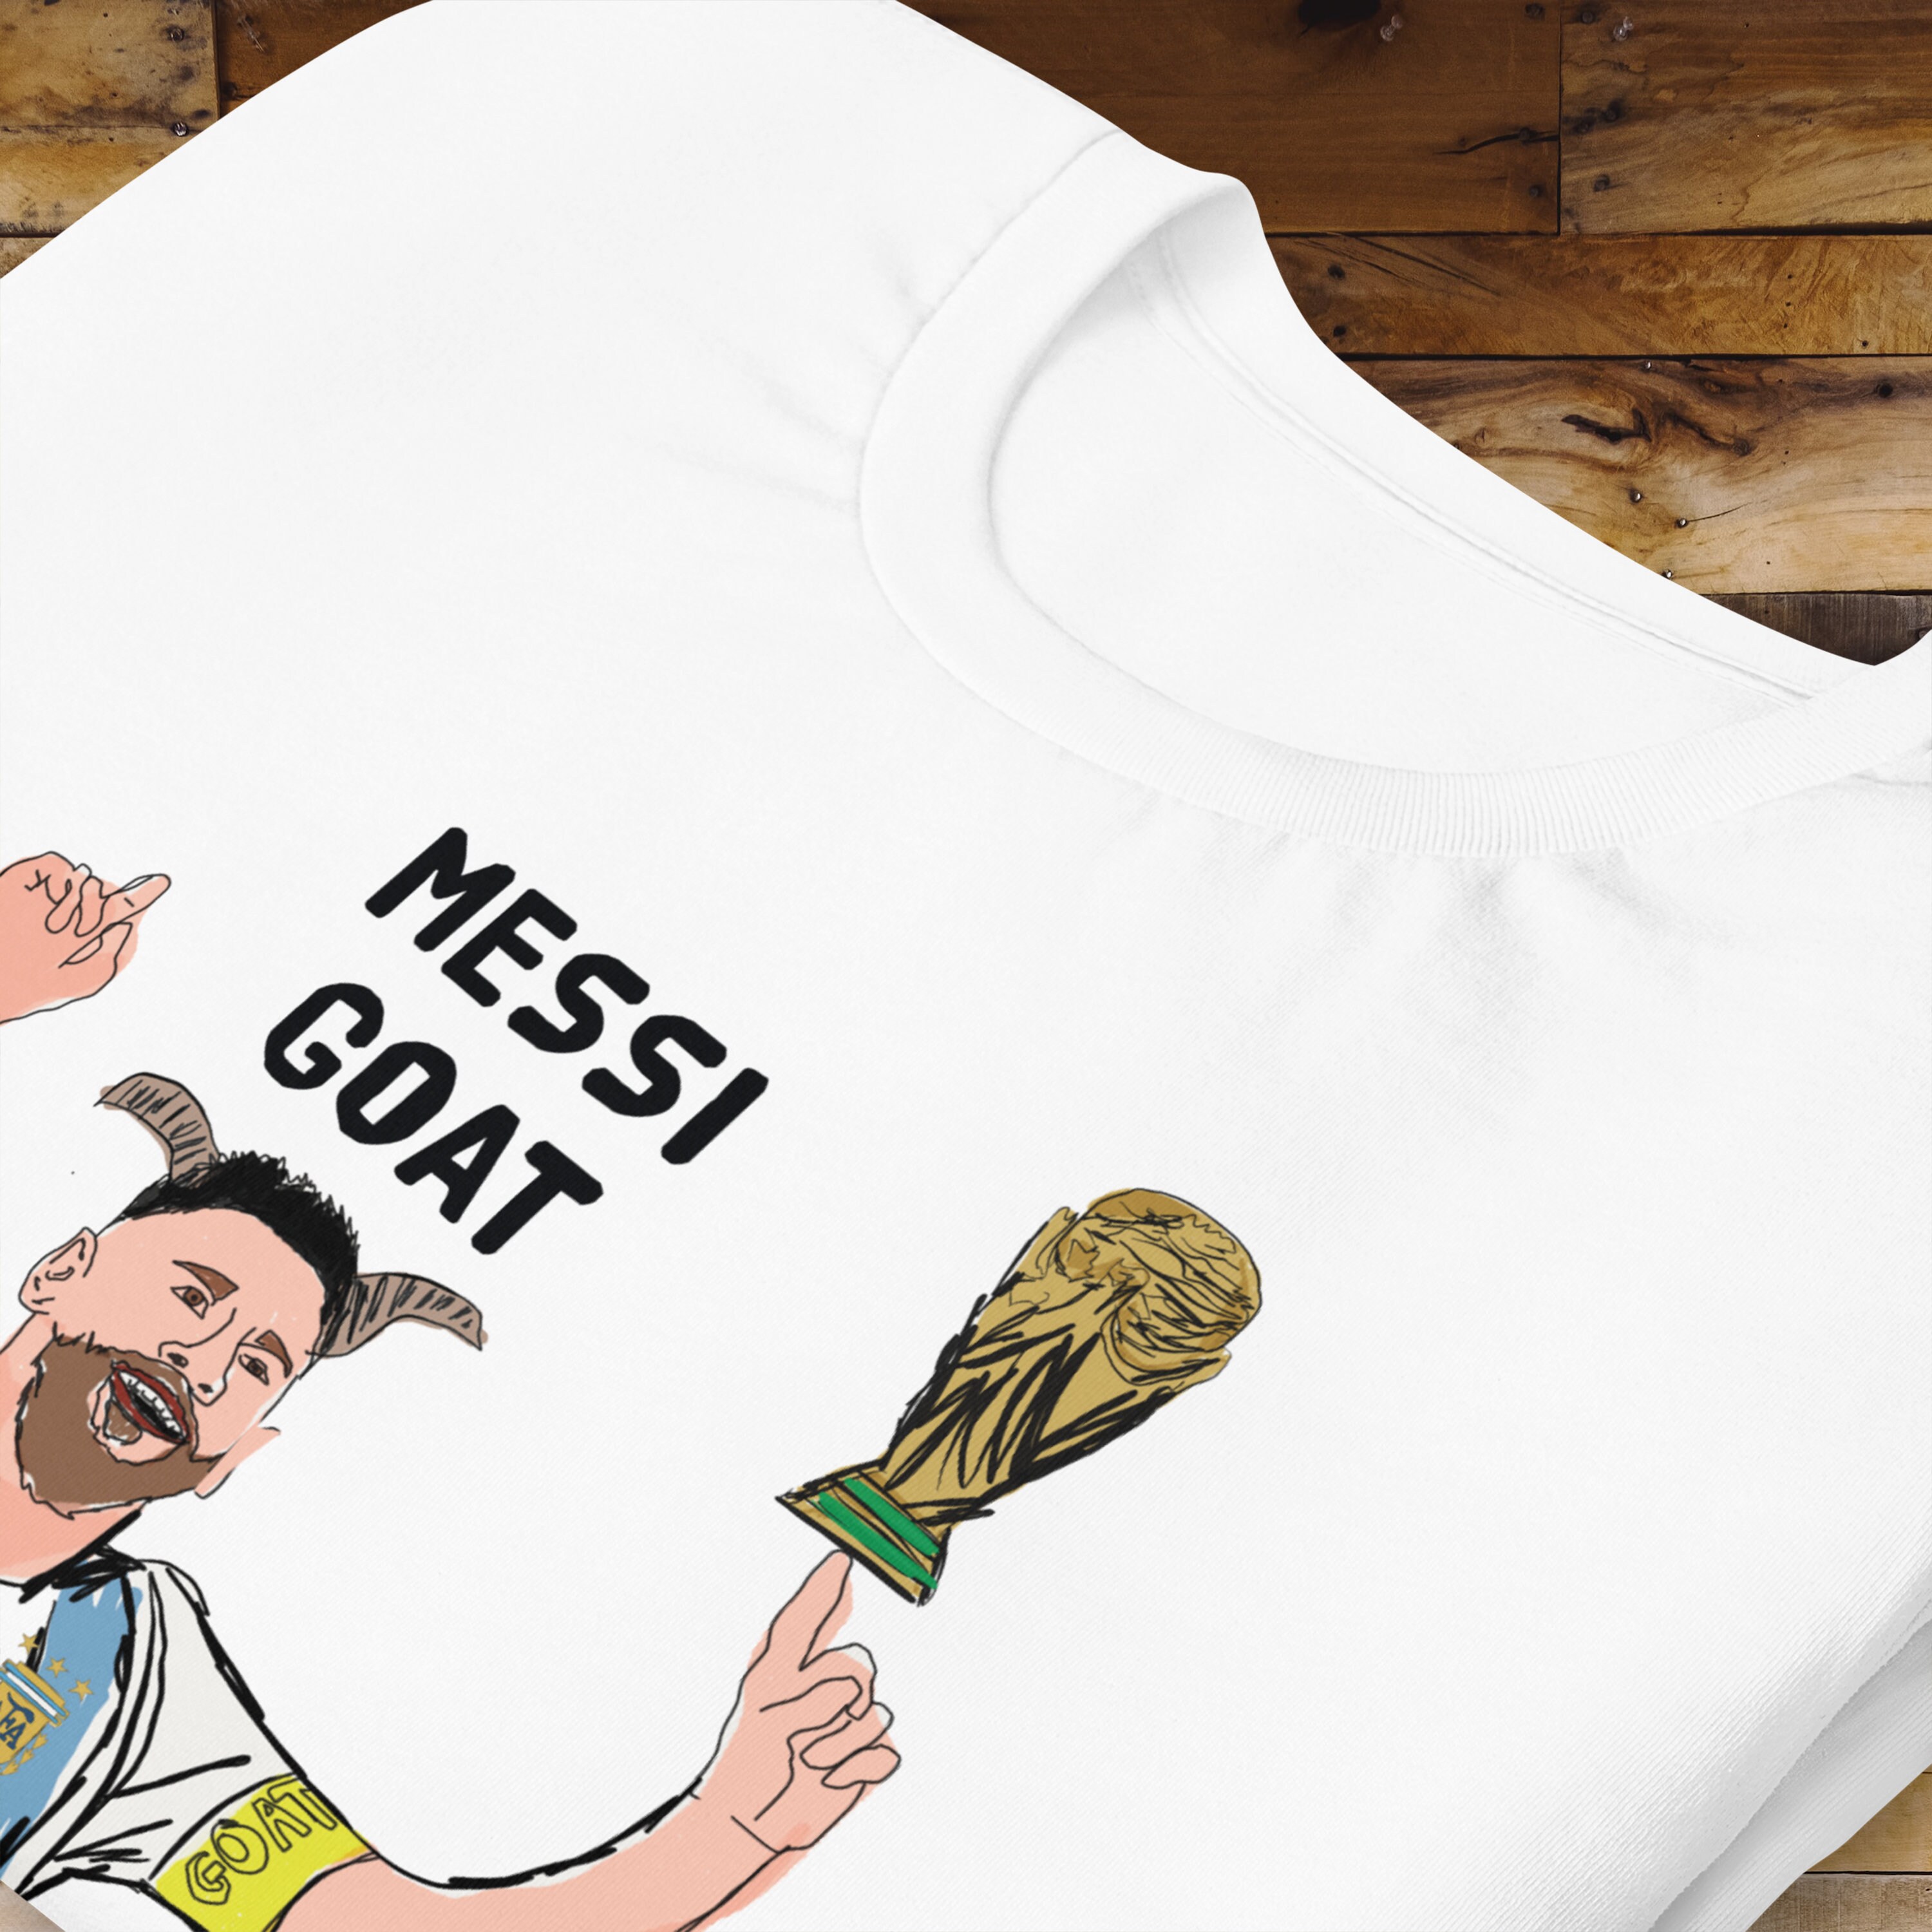 Discover Argentina World Cup Shirt Winners 2022 | Lionel Messi | Goat